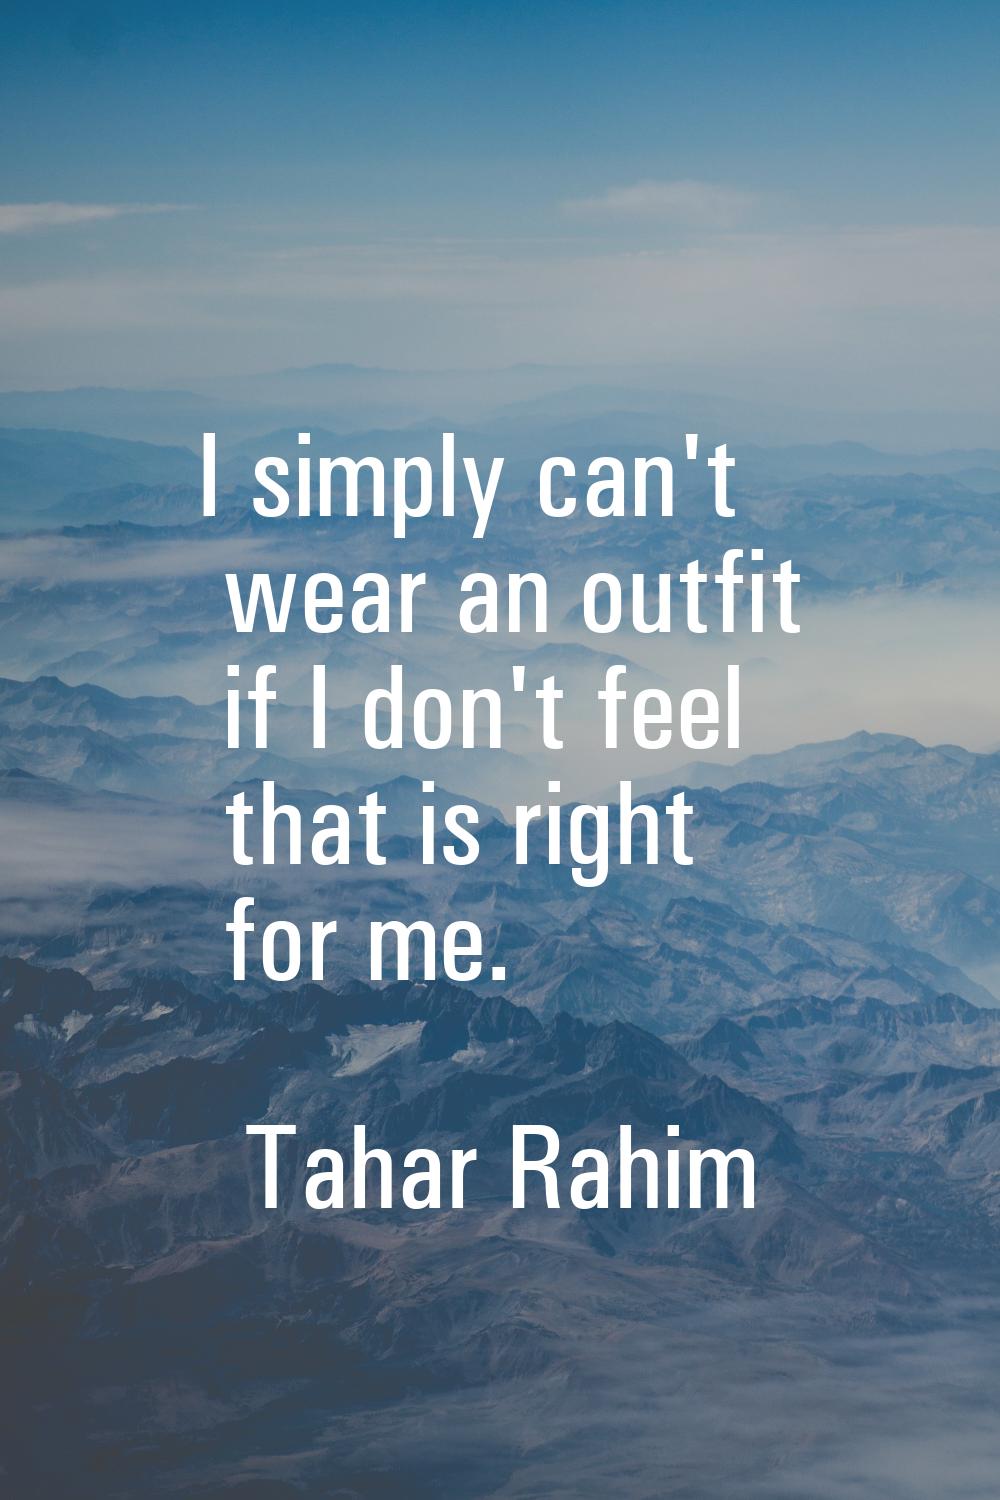 I simply can't wear an outfit if I don't feel that is right for me.